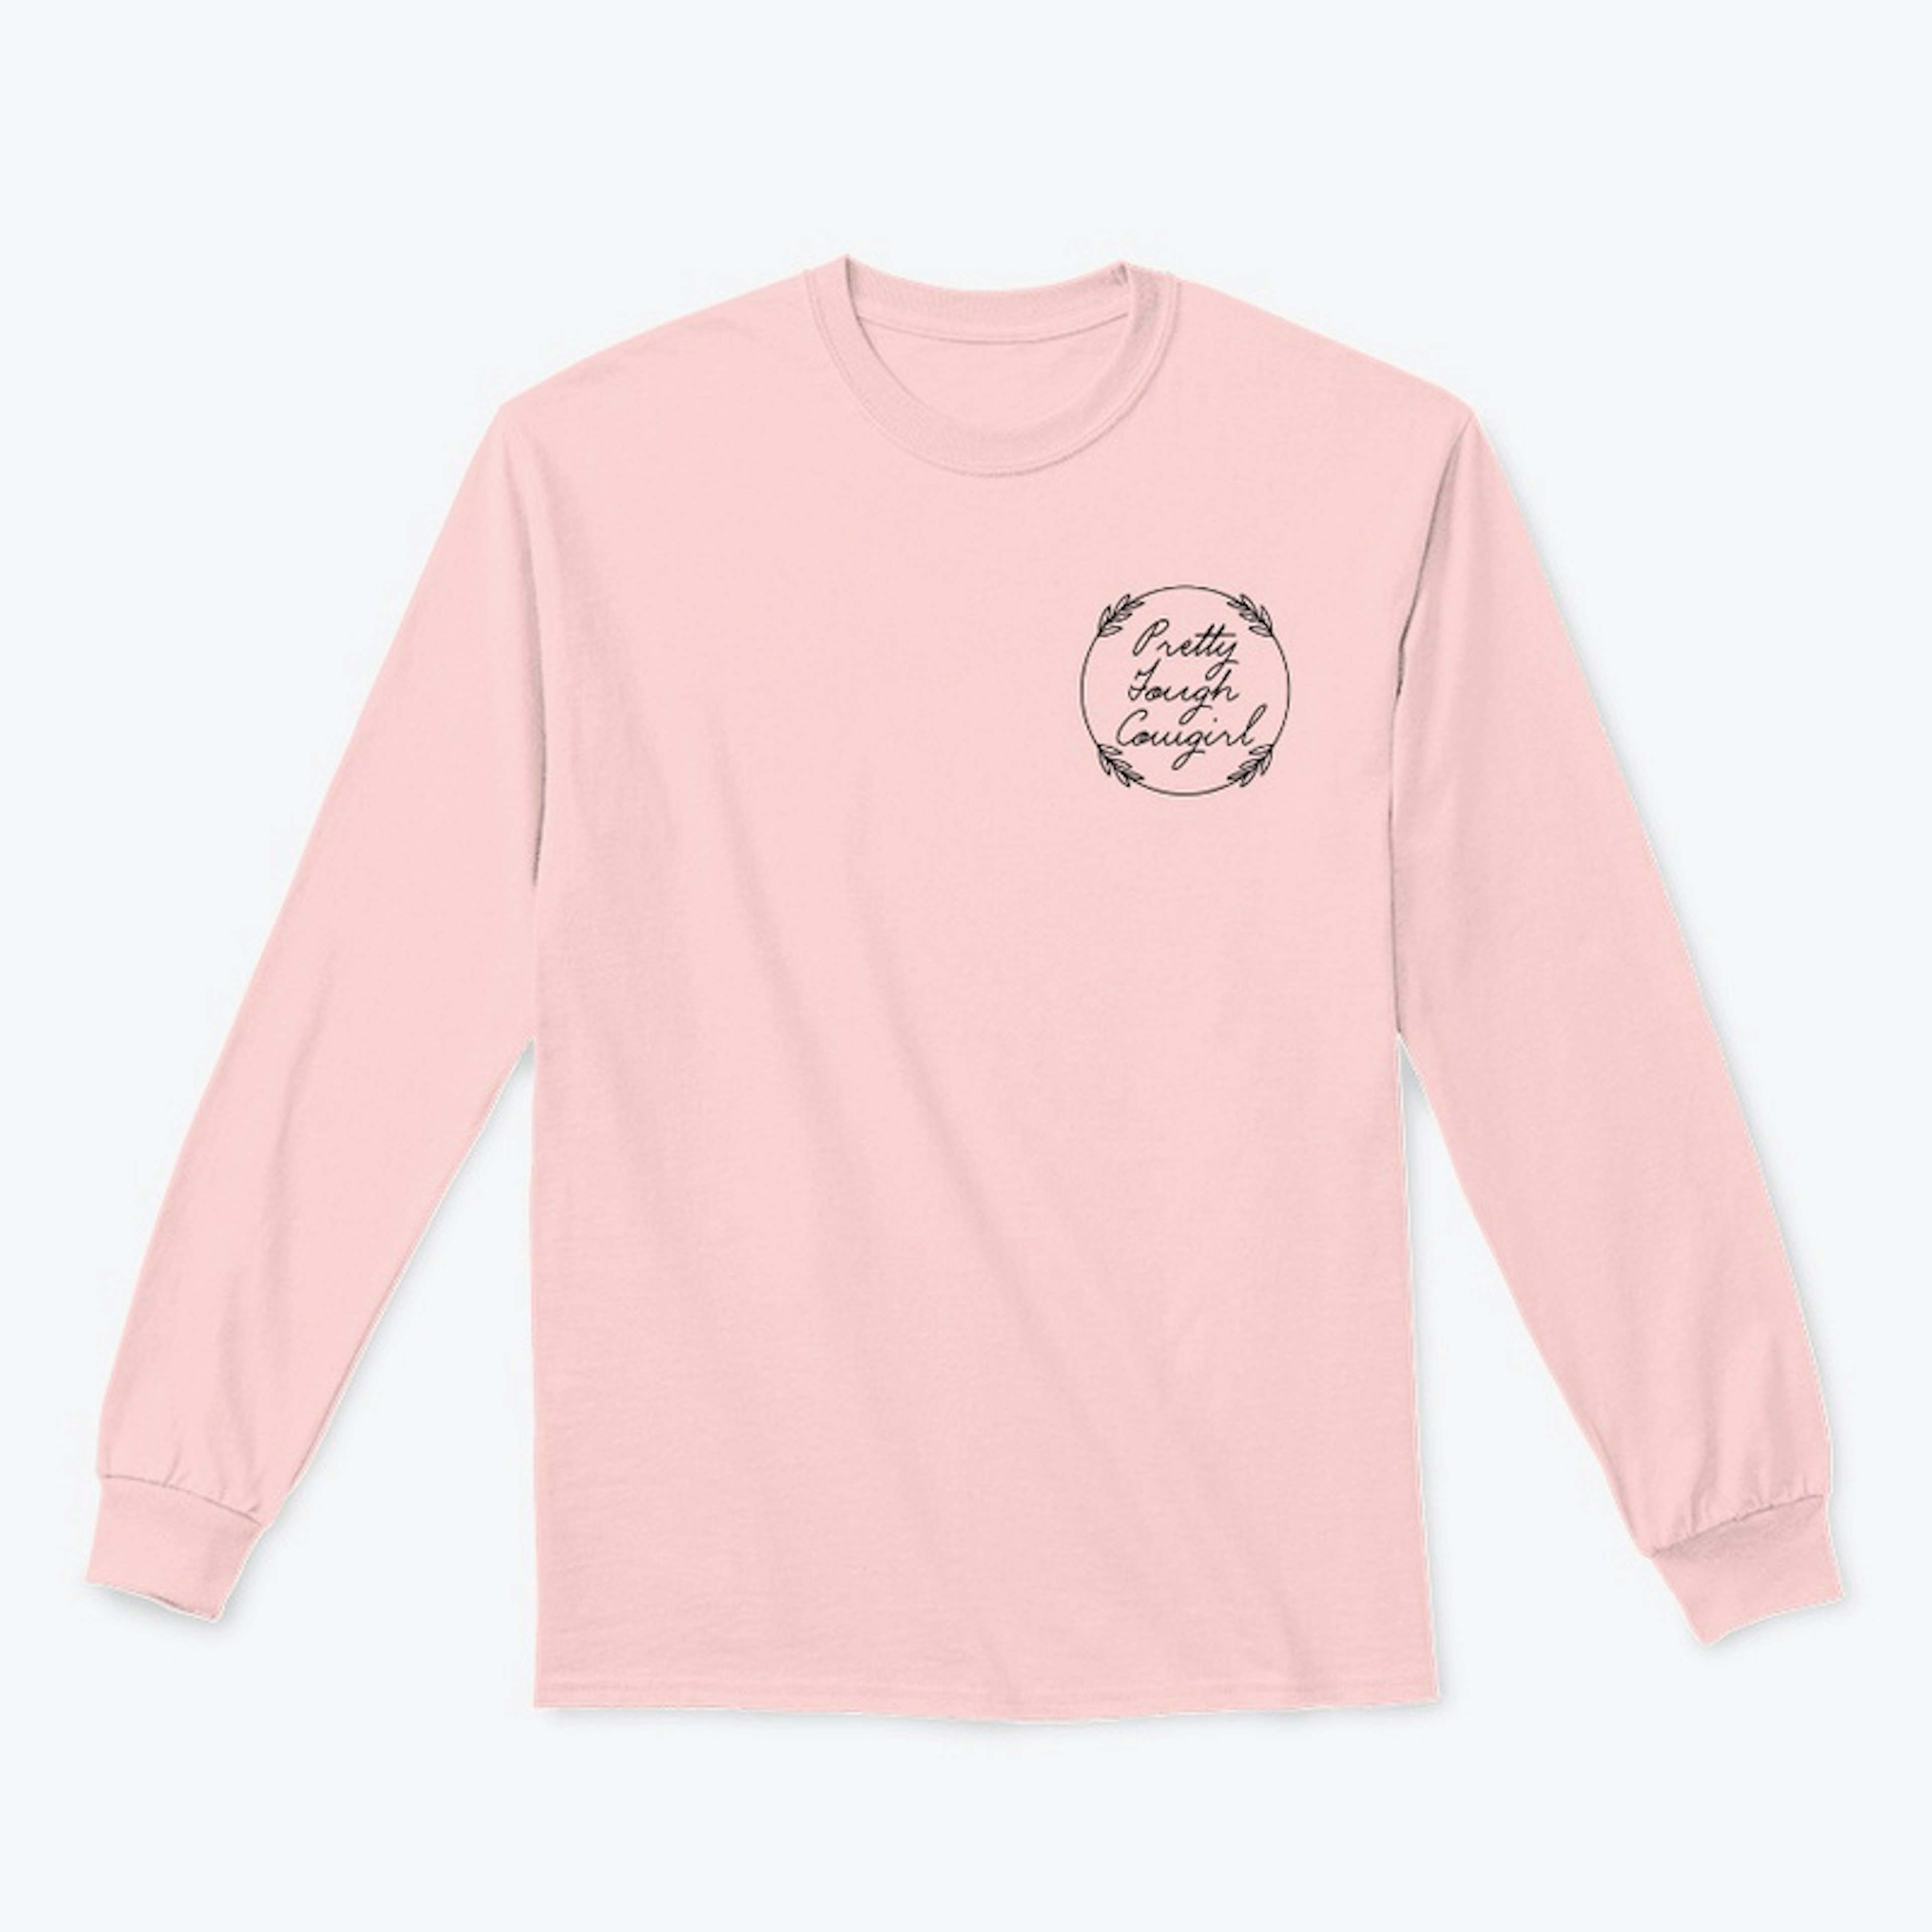 Round Pretty Tough Cowgirl Long Sleeve